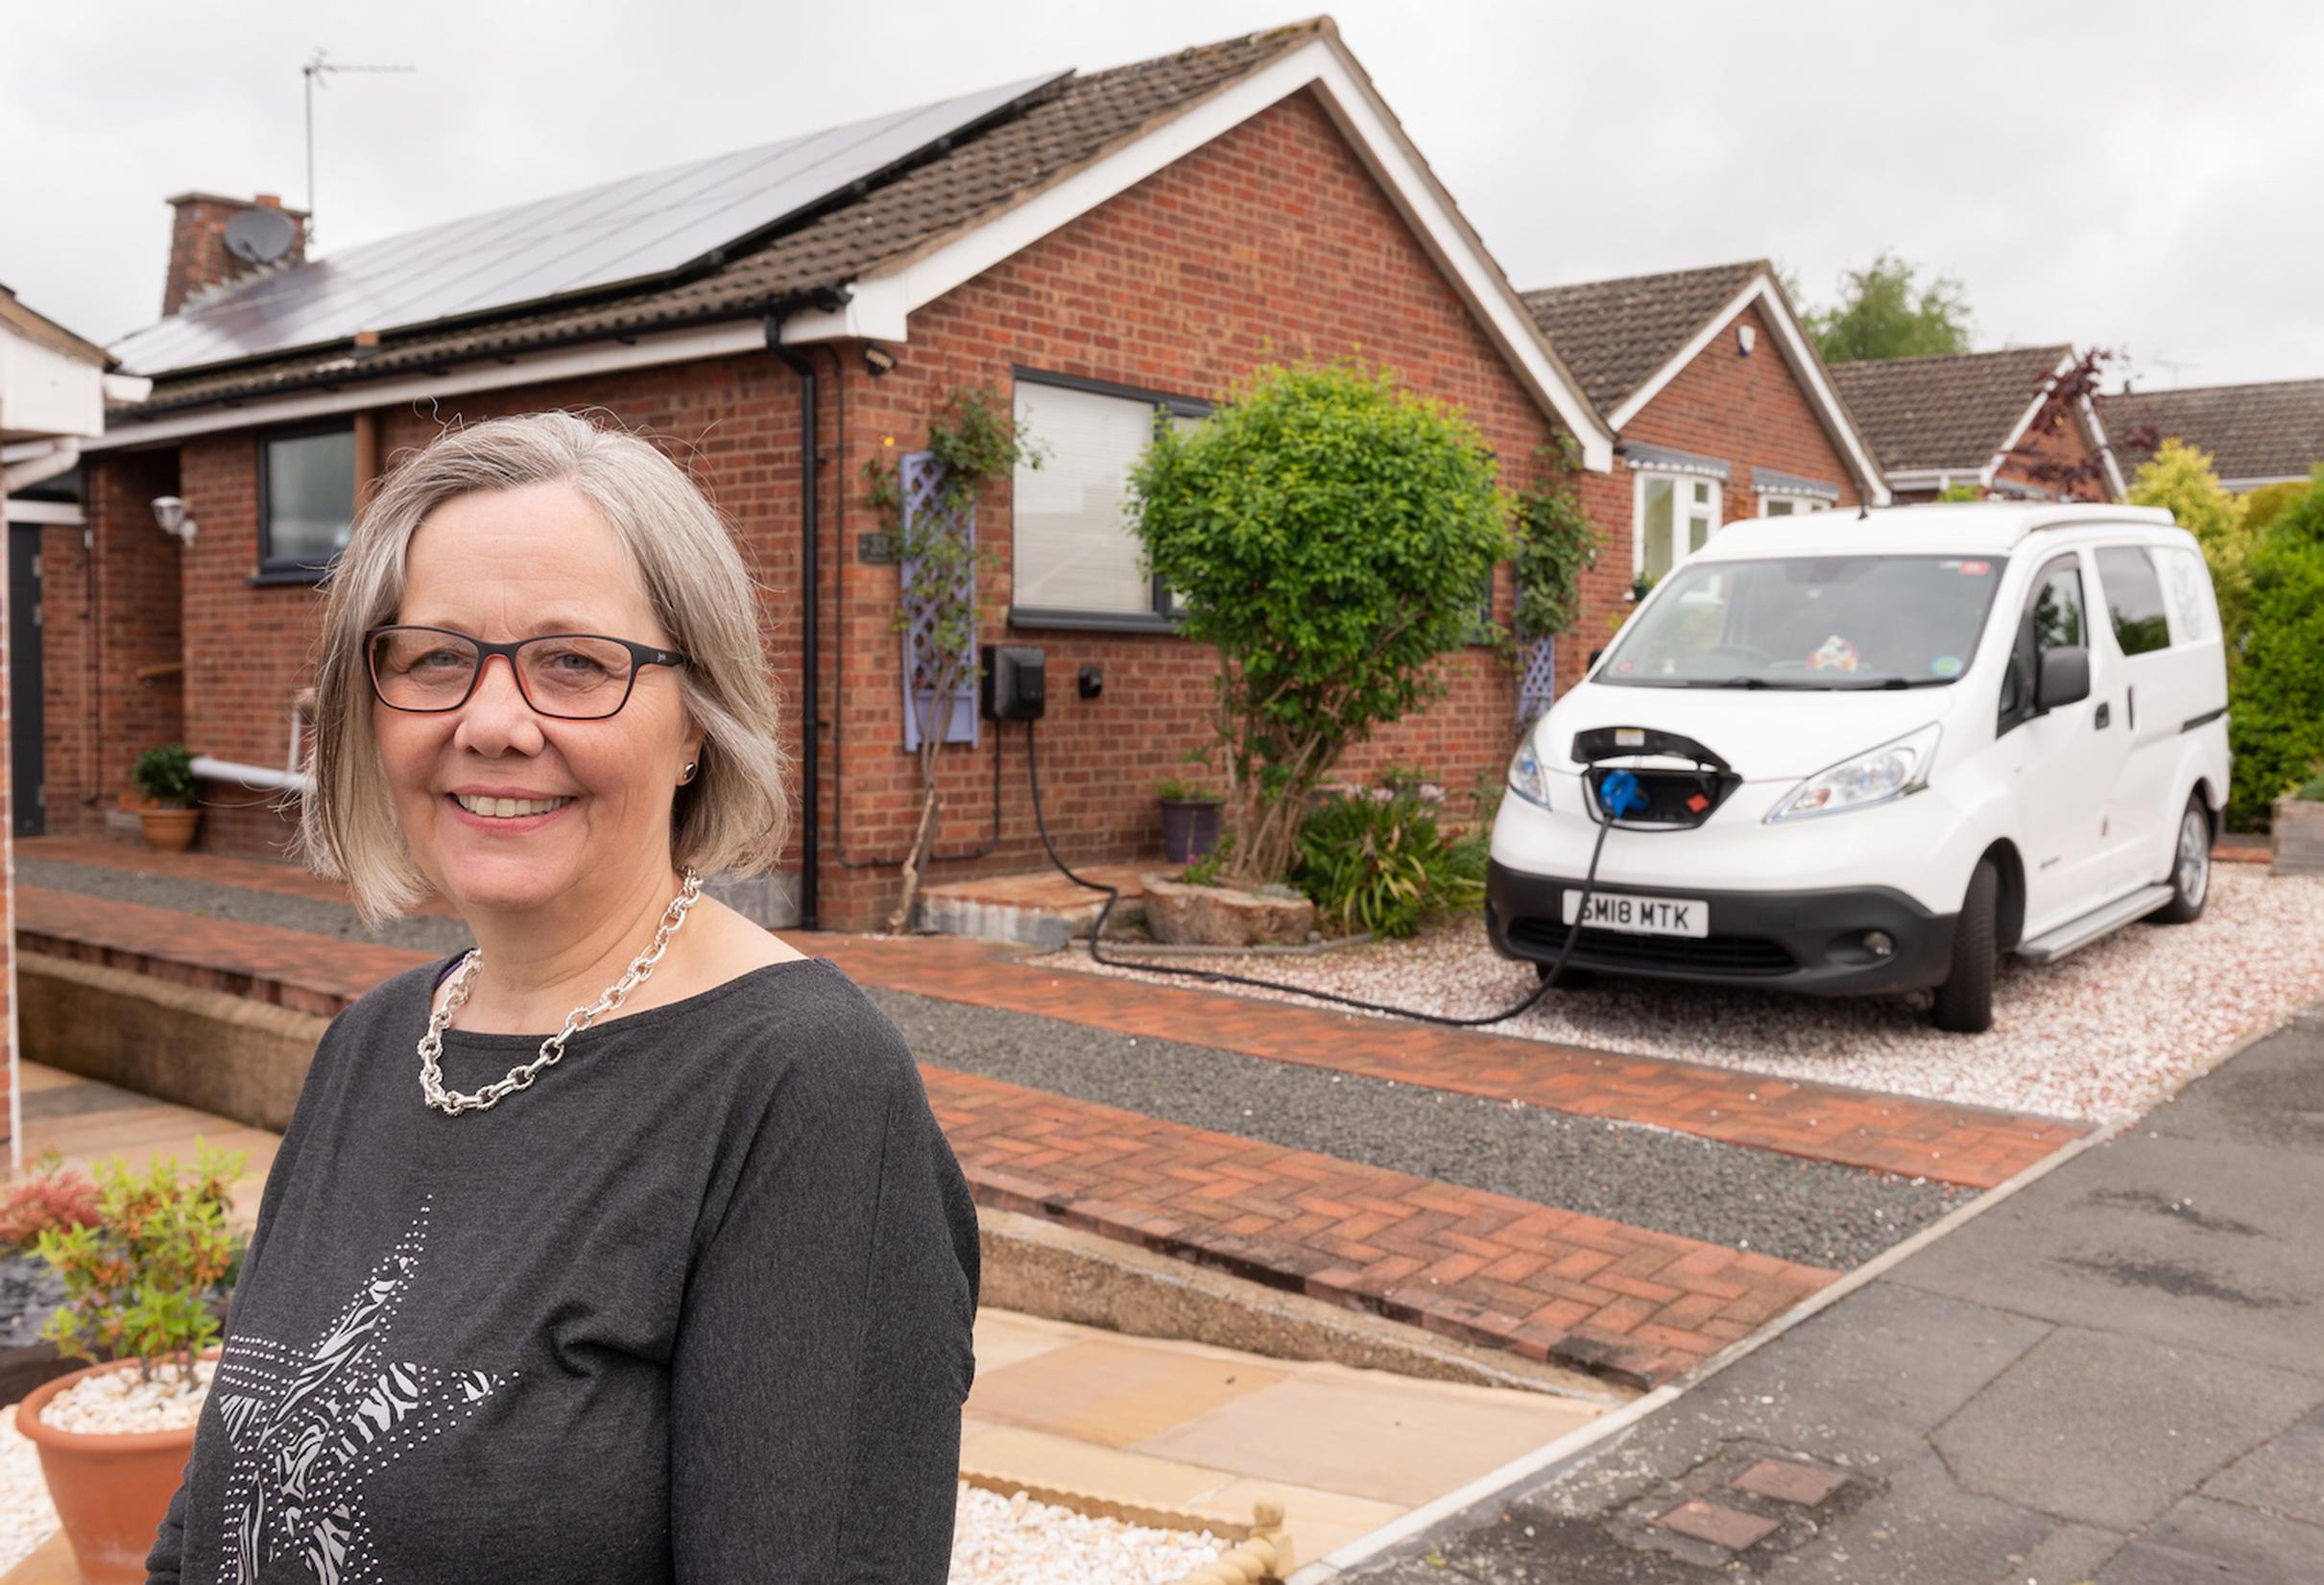 Vehicle-to-grid reduces home energy bills, says Electric Nation